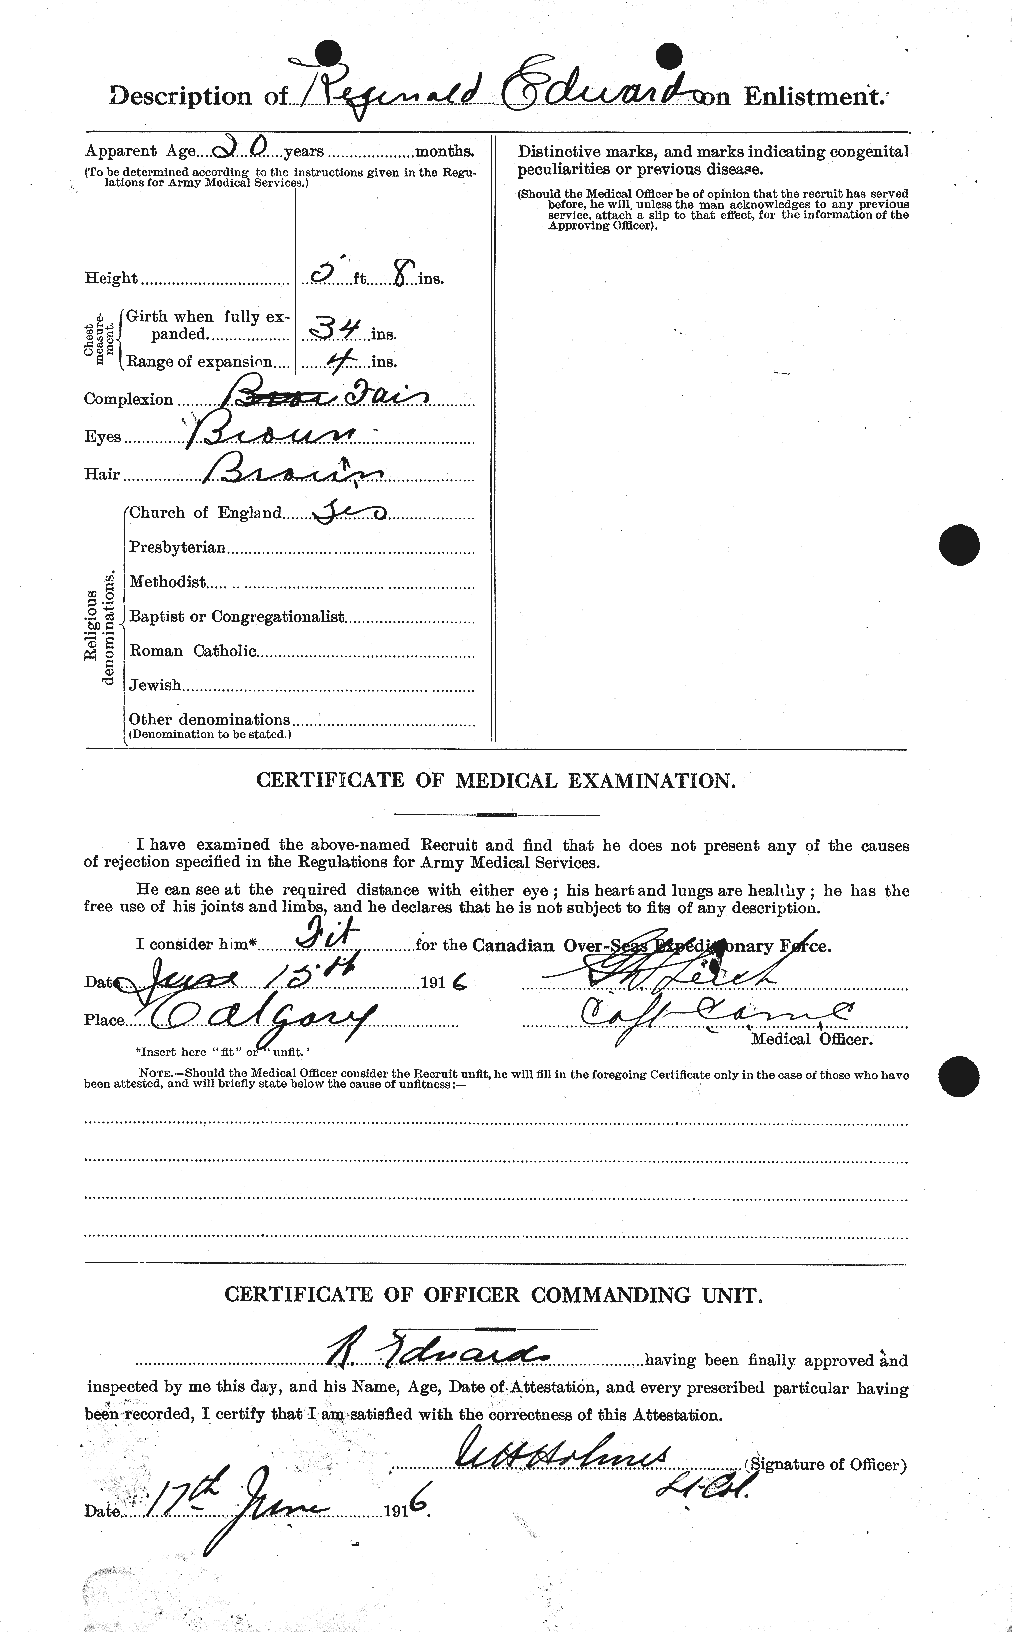 Personnel Records of the First World War - CEF 310246b